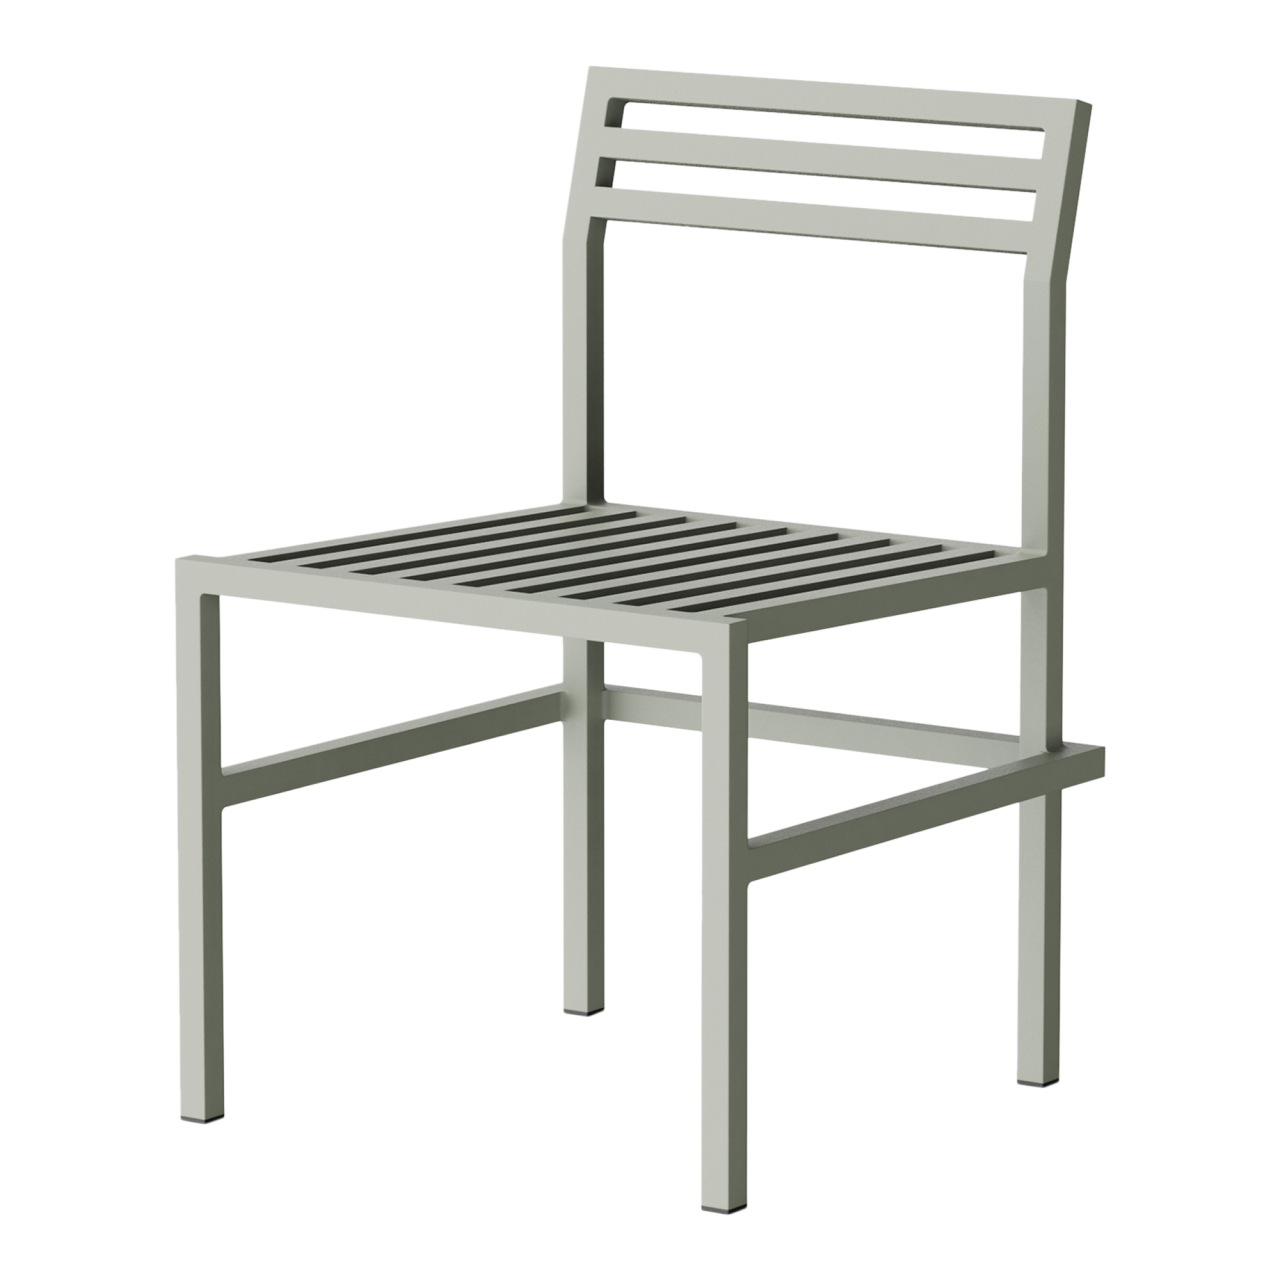 19 Outdoors Dining Chair Stuhl